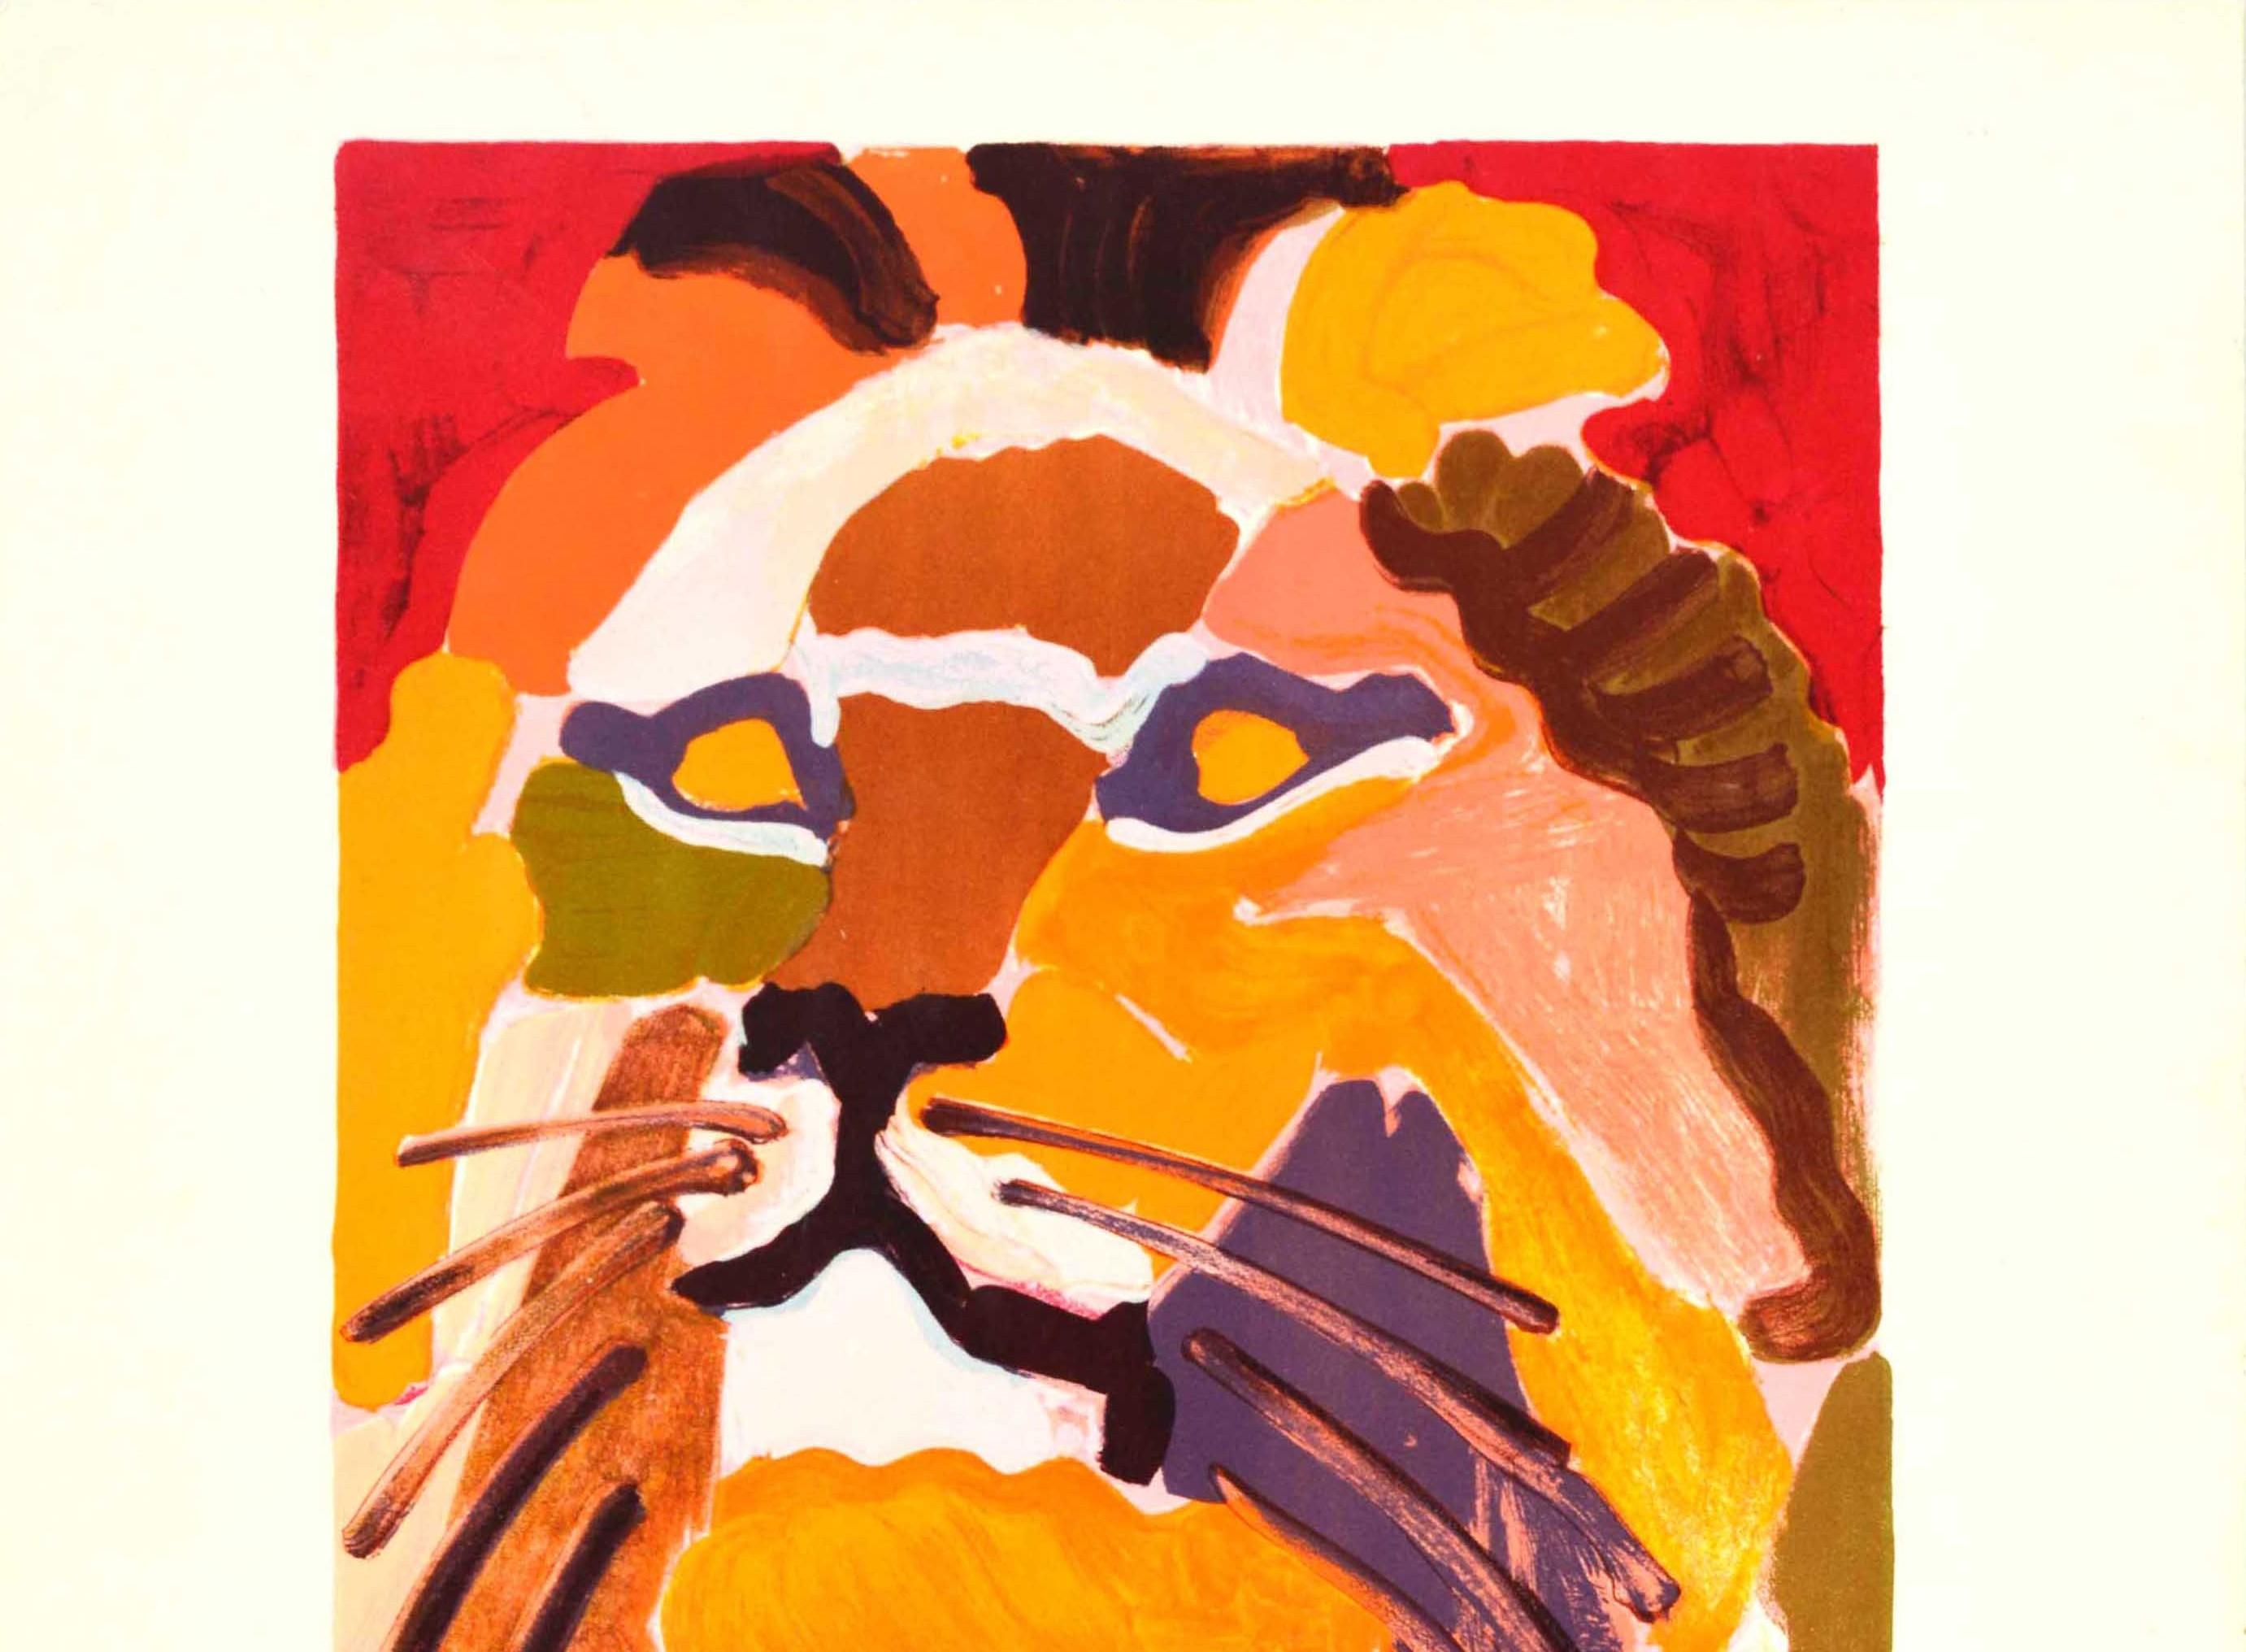 Original vintage advertising poster for an exhibition of work by the French painter Charles Lapicque (1898-1988) held in February and March 1963 at the Villand & Galanis gallery in Paris featuring a colourful painting of Le Lion (1962) by the artist